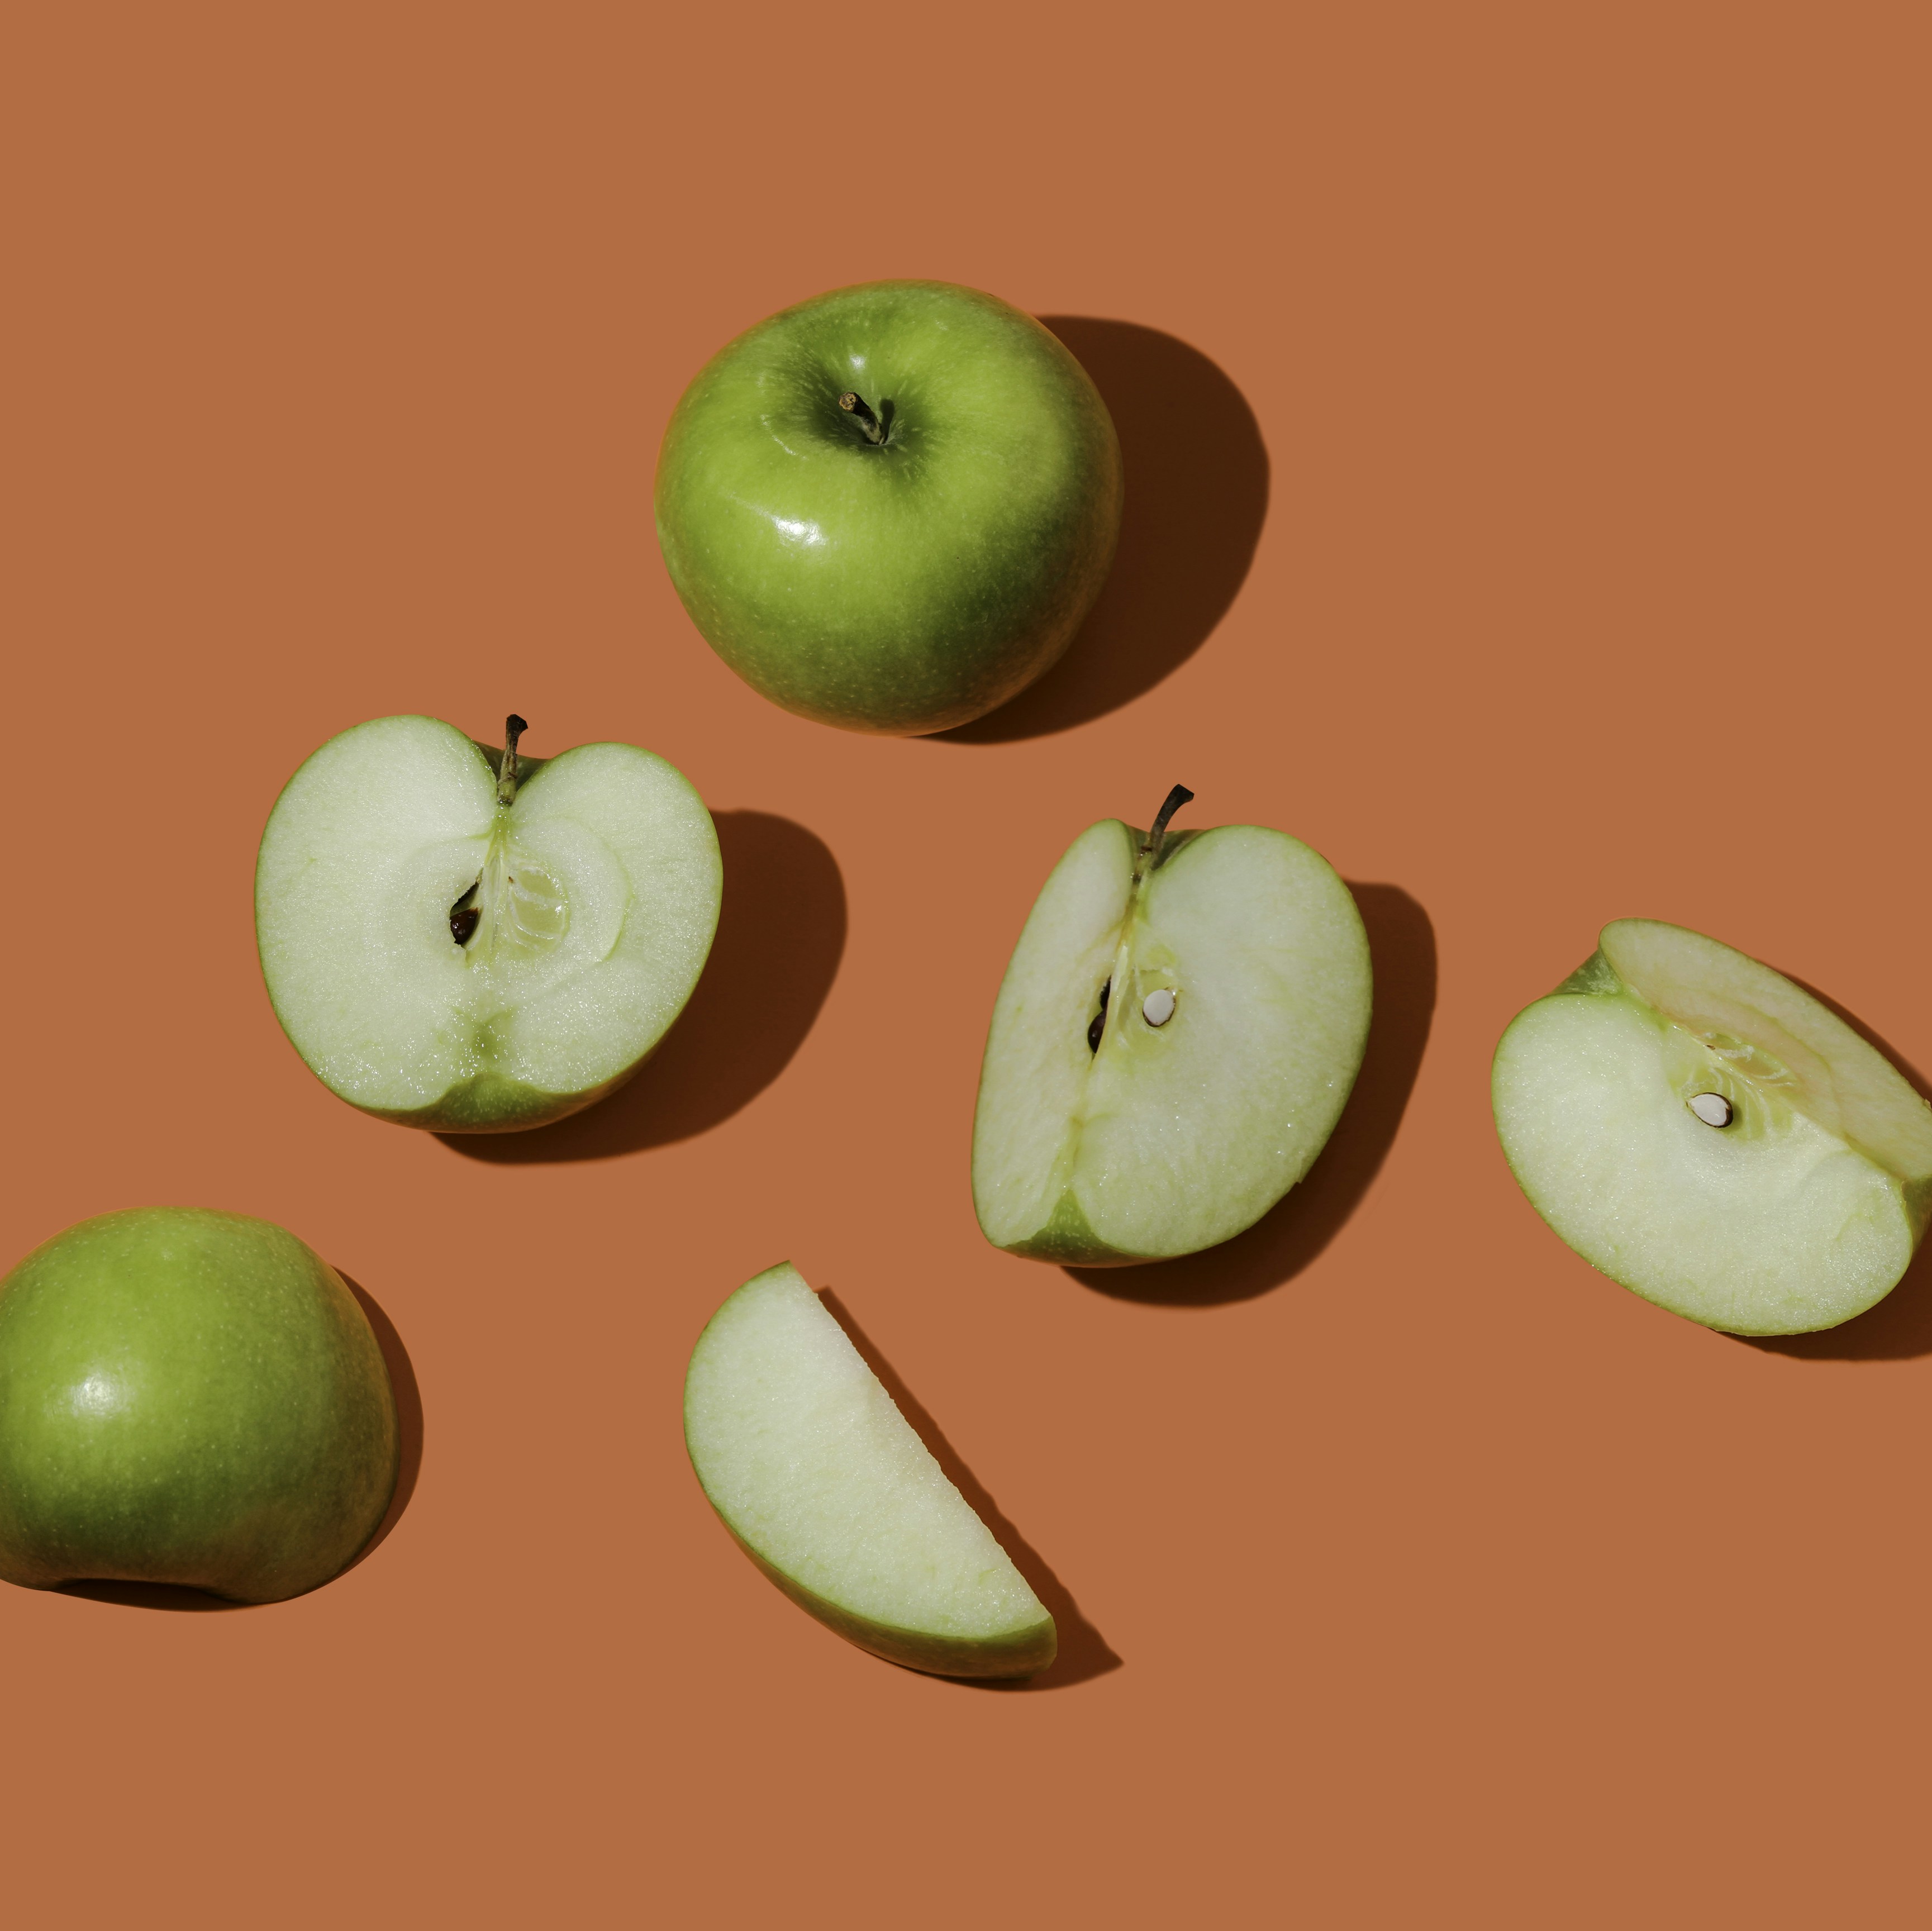 Green apples cut in various ways laying on an bright orange surface